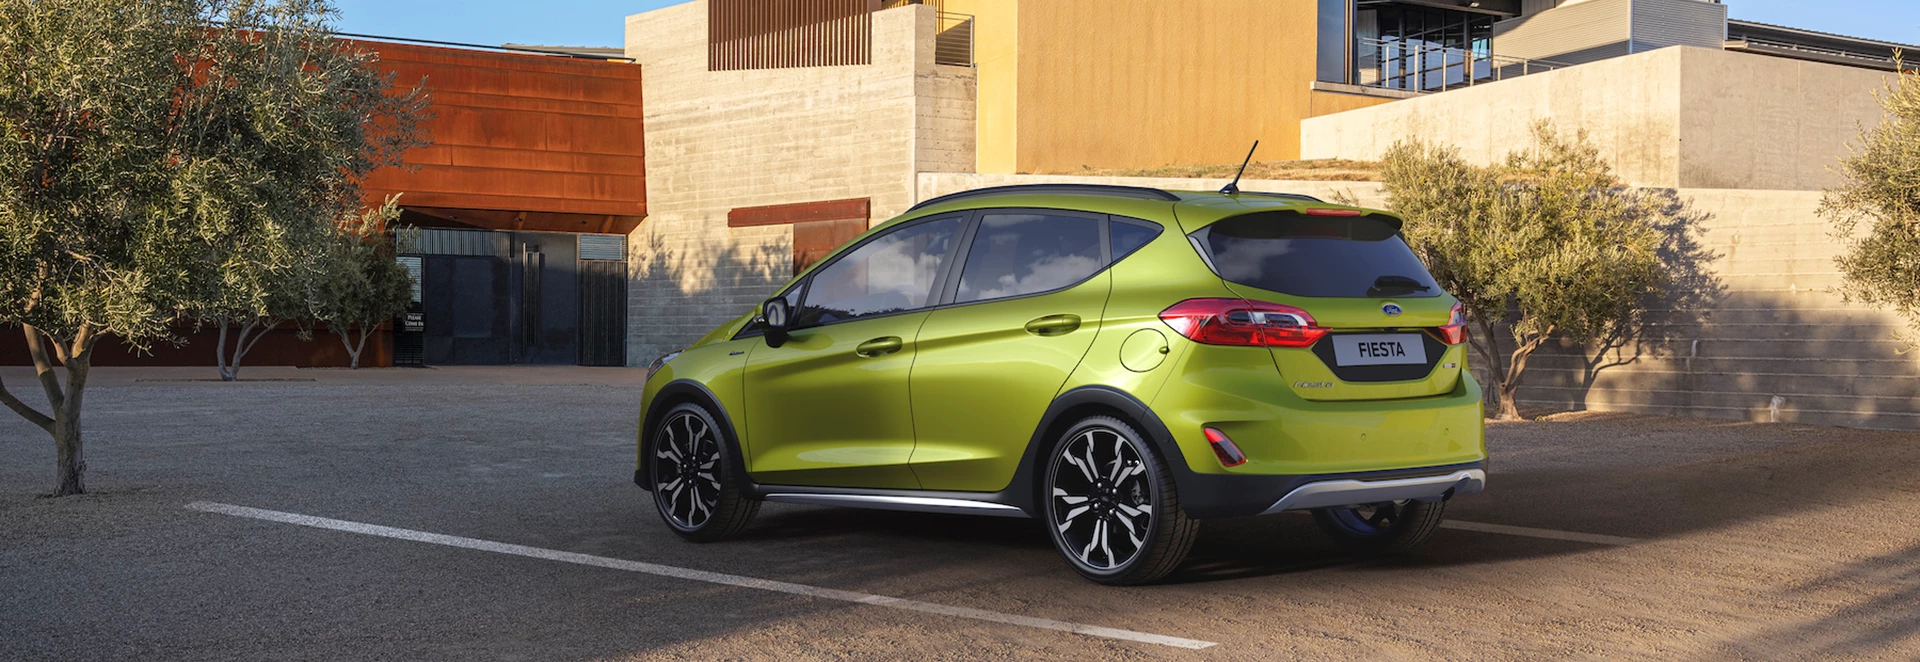 What’s new on the 2020 Ford Fiesta and Focus? 